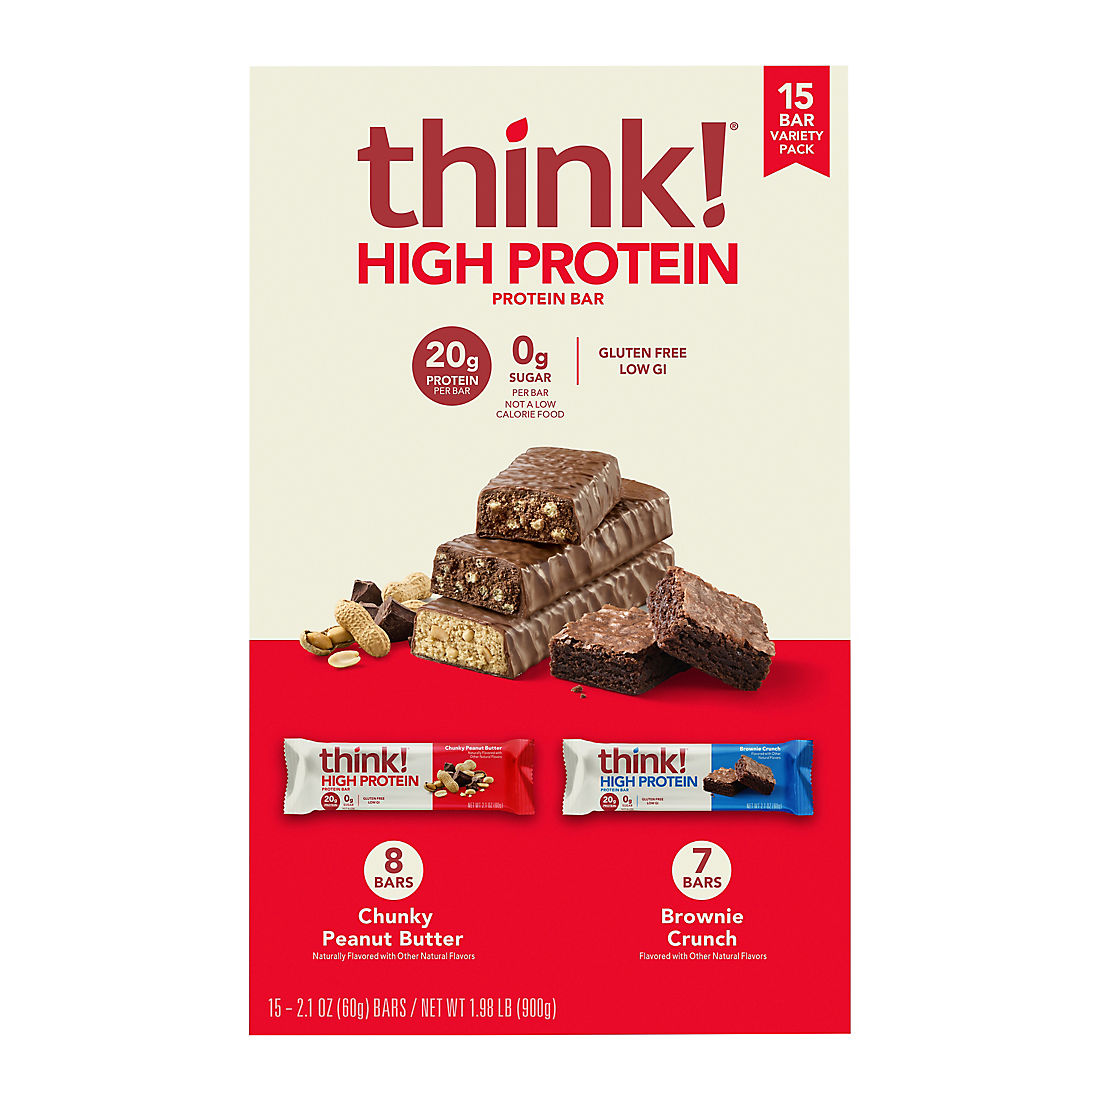 Think! High Protein Bars Variety Pack, 15 ct